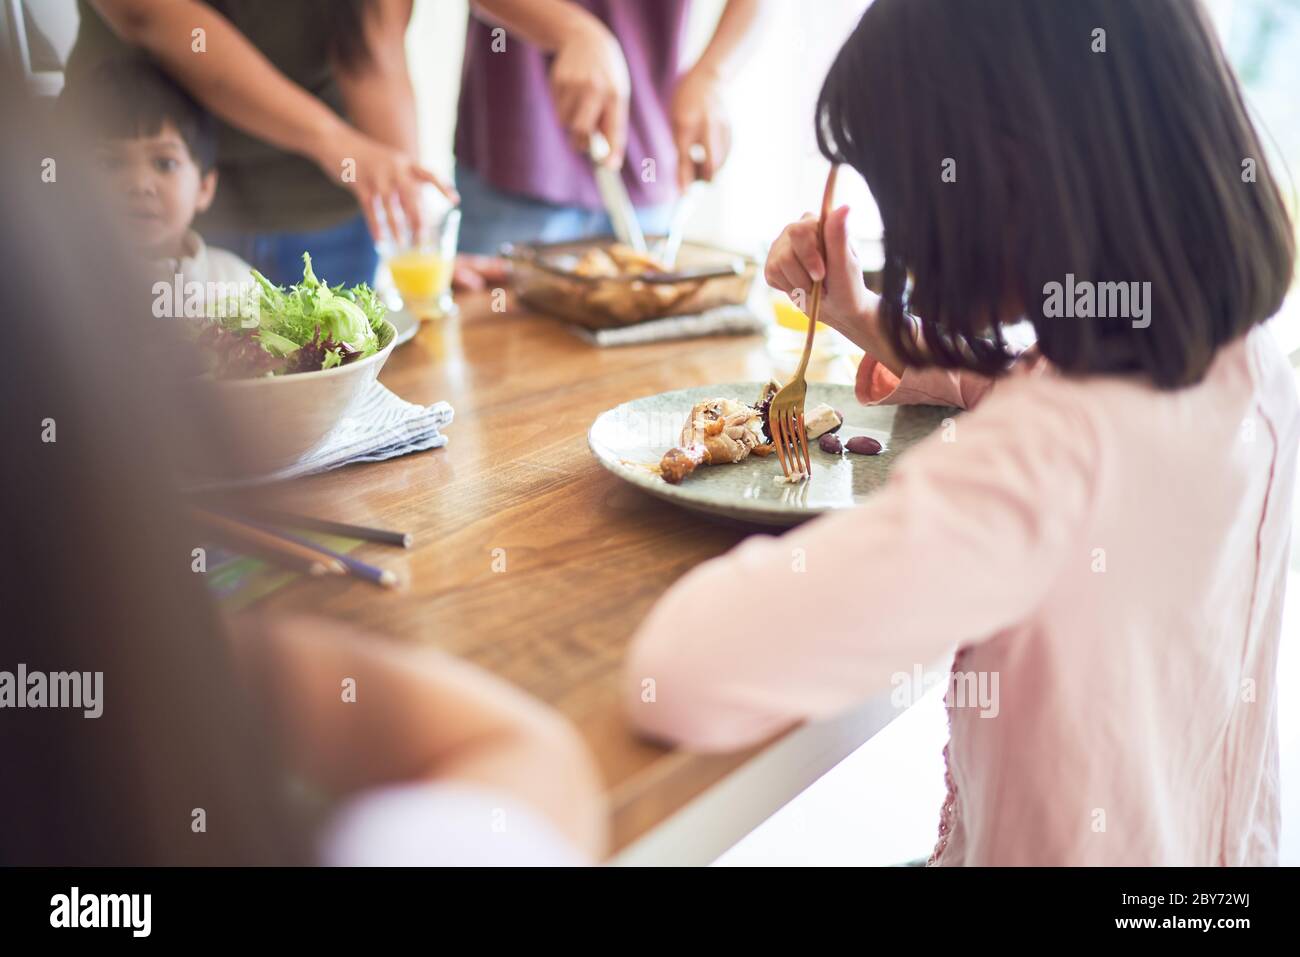 Girl eating lunch at dining table Stock Photo